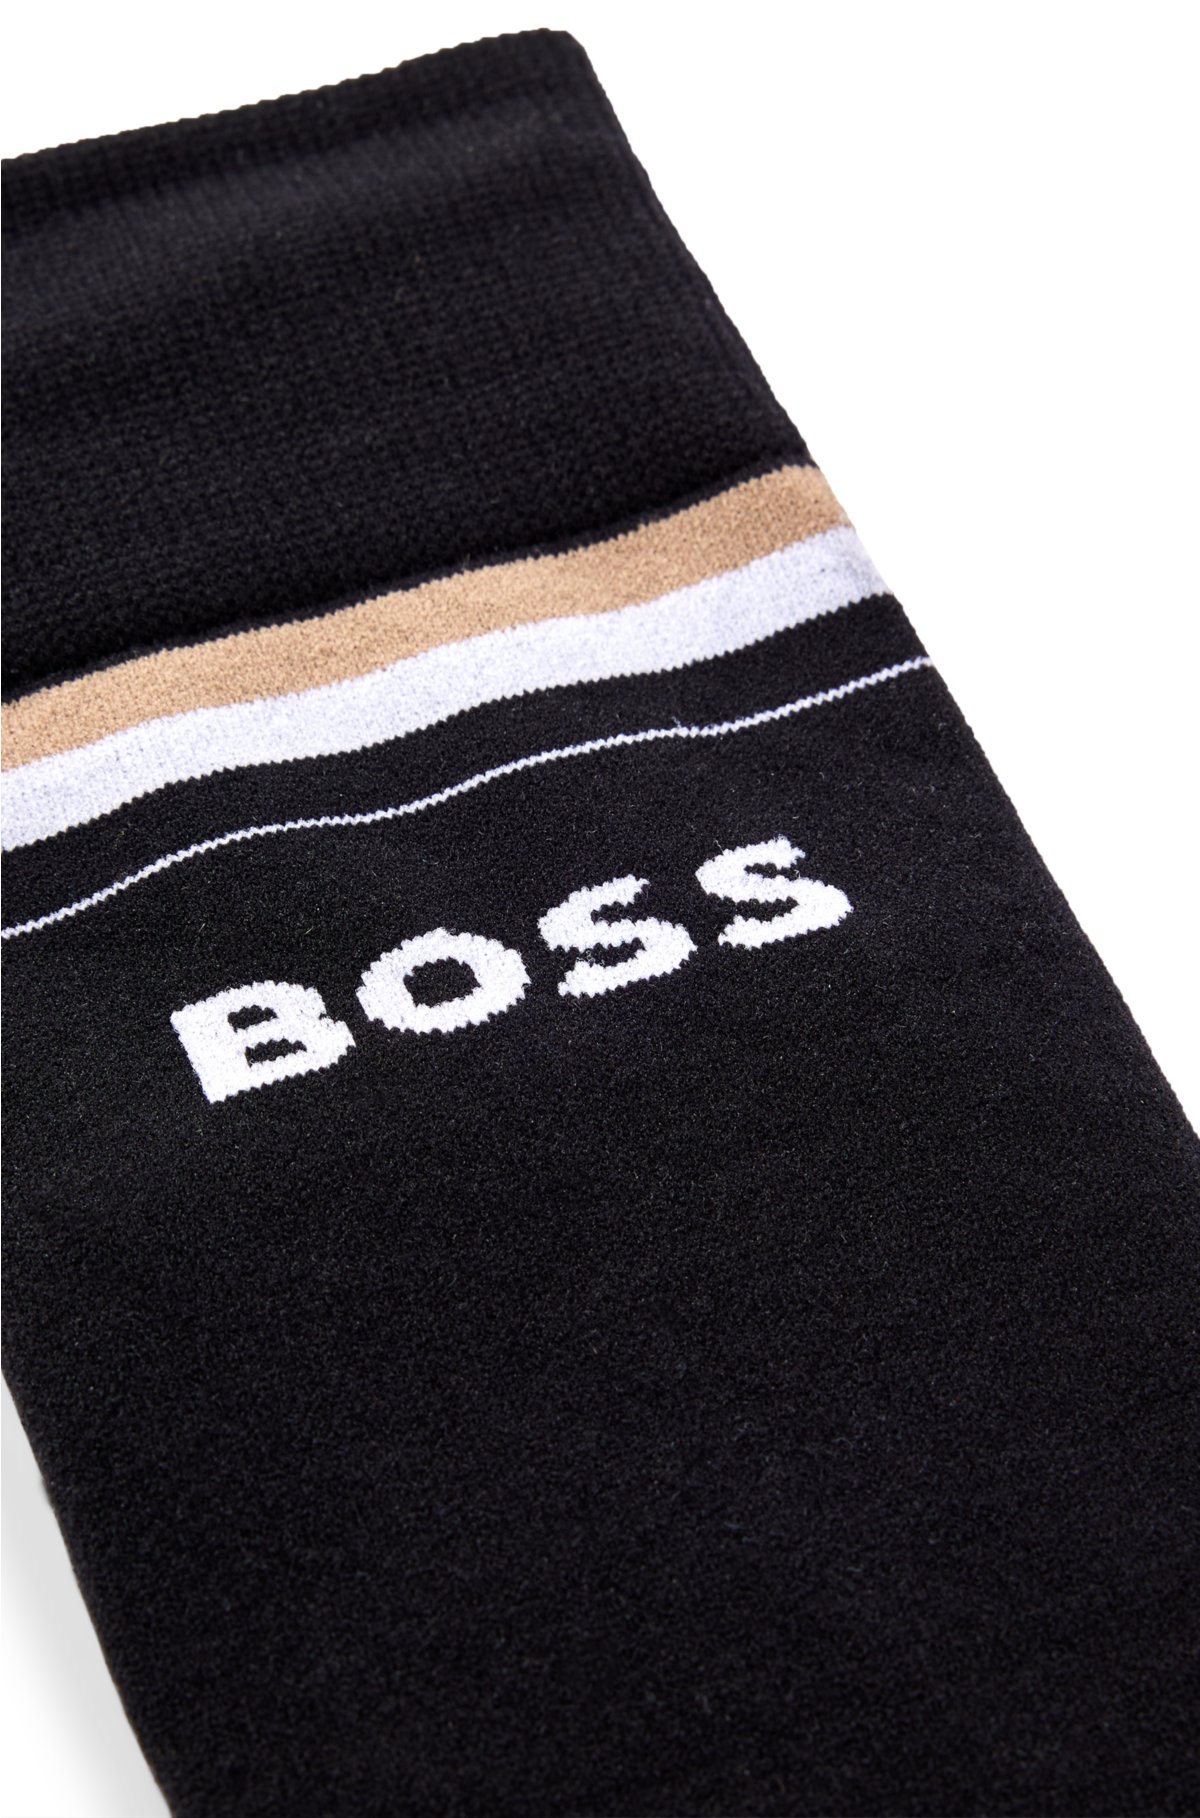 Equestrian riding socks with logo in cotton blend, Black